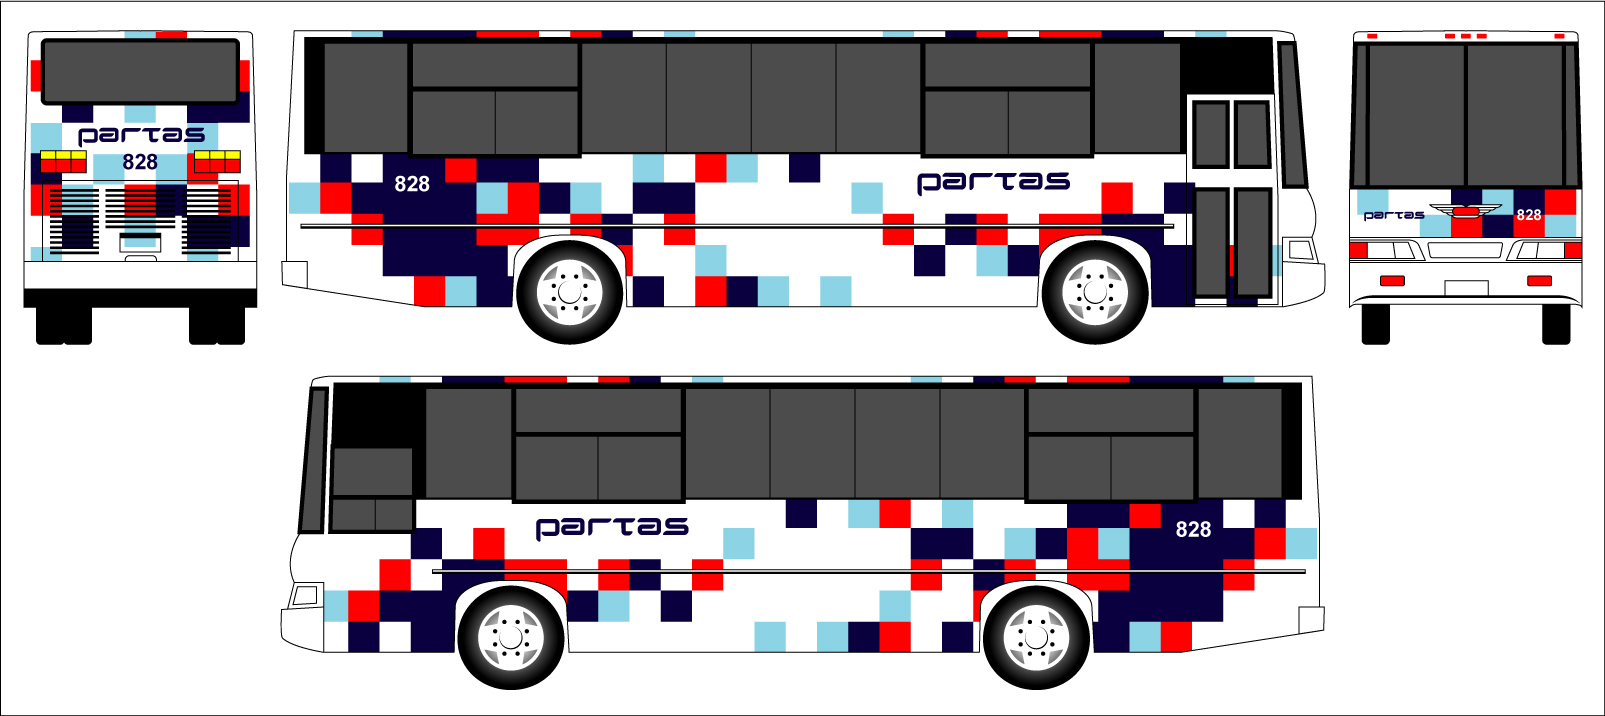 the image is an illustration and it depicts a bus with different colored squares